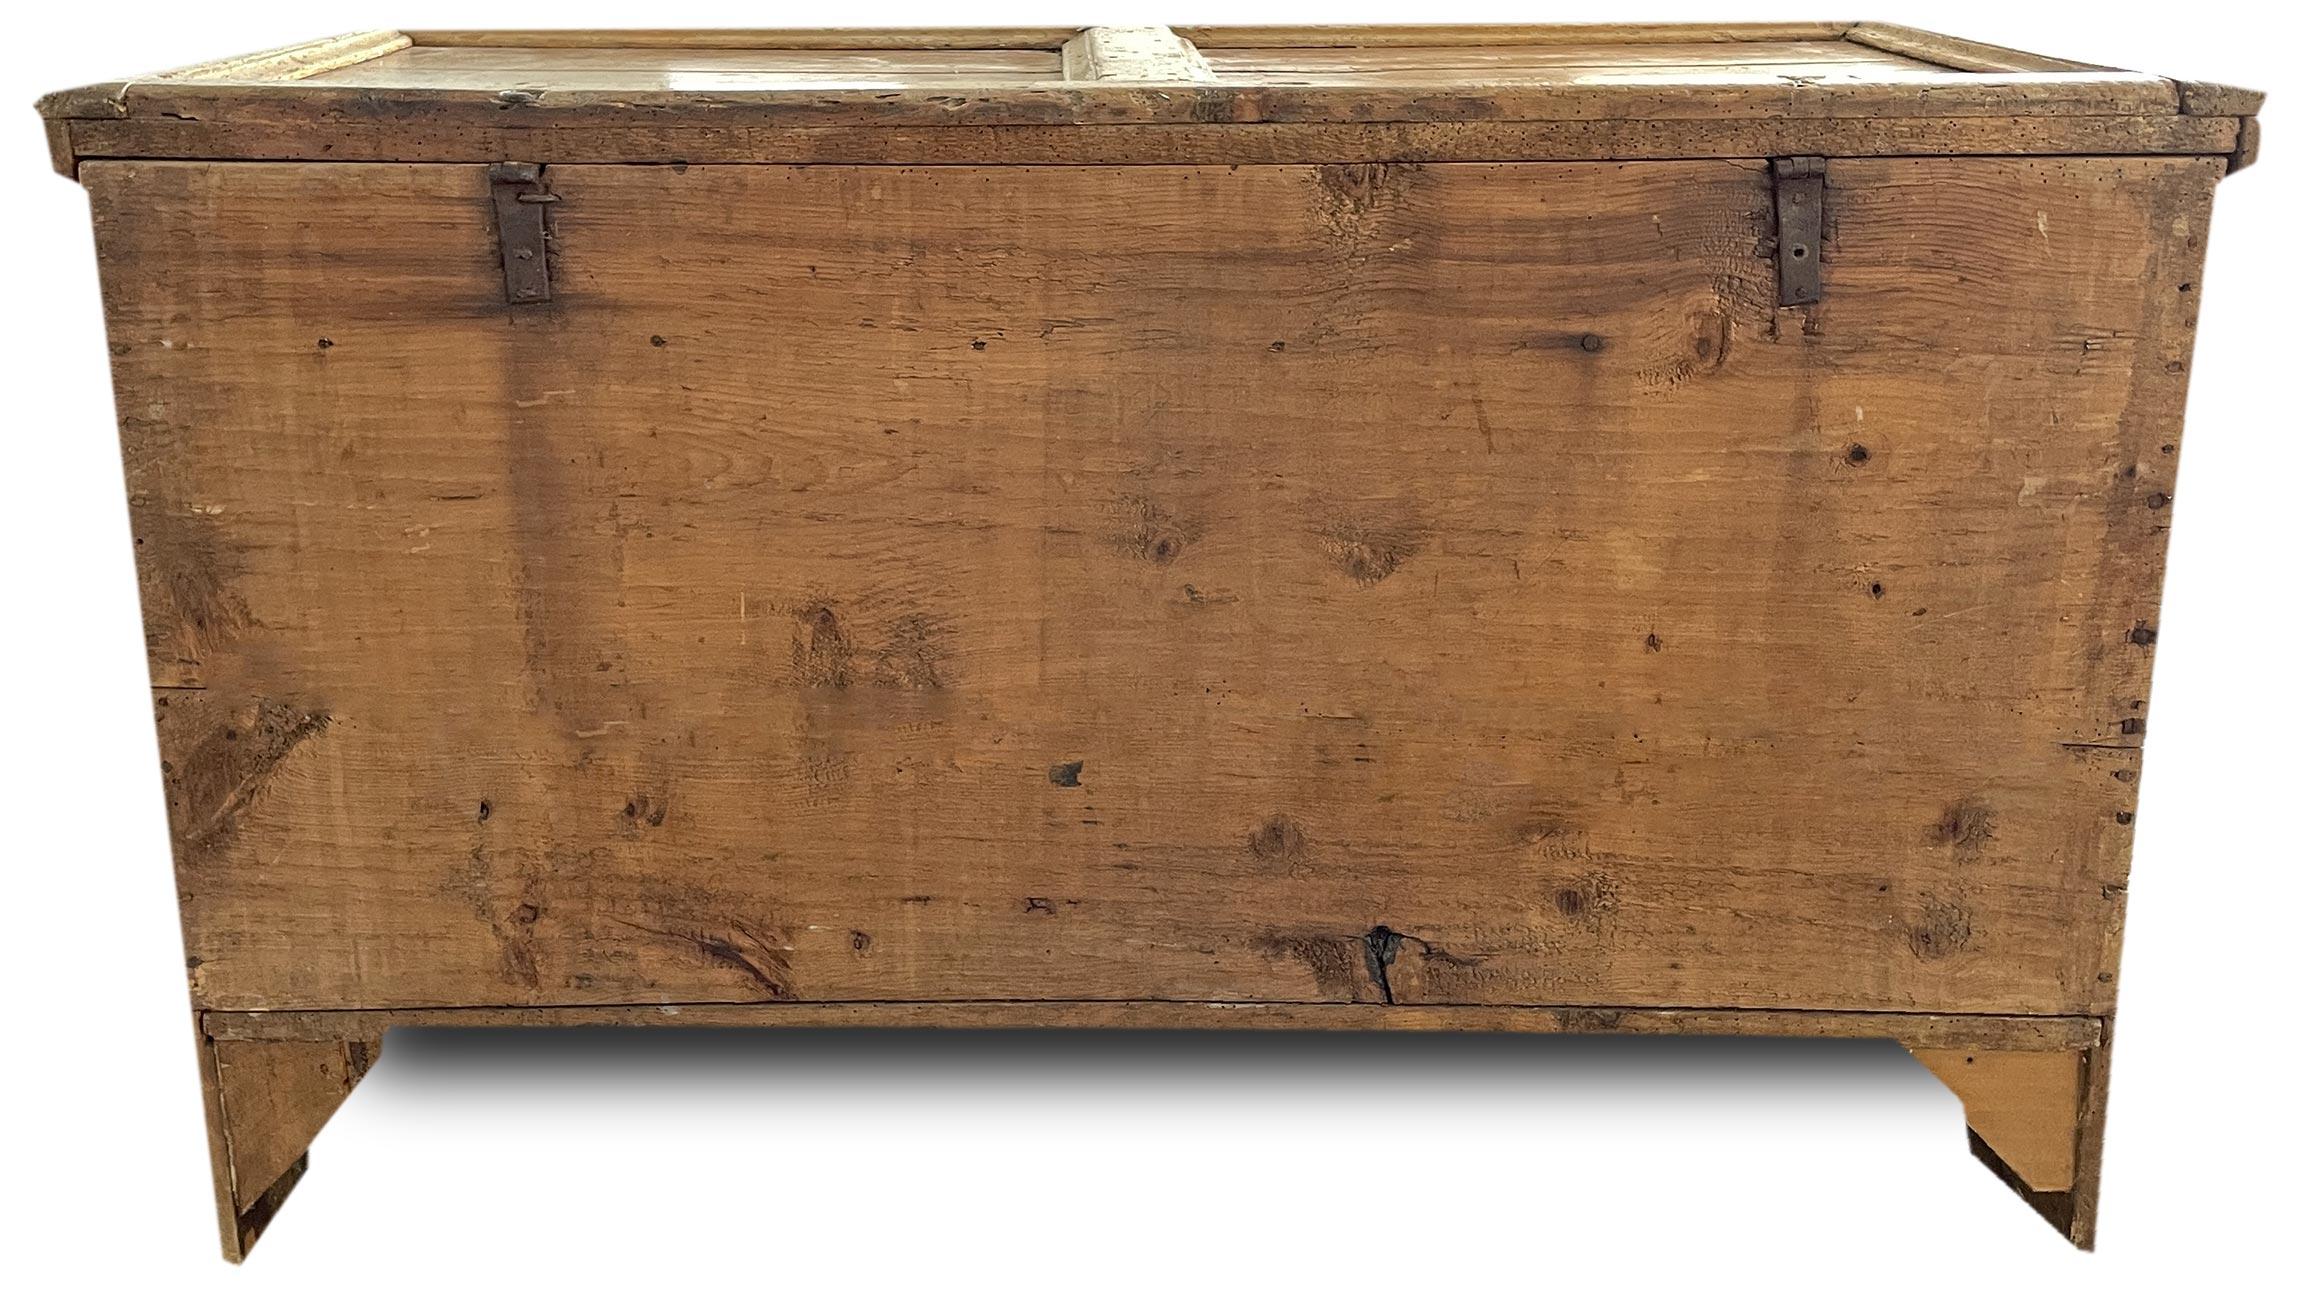 Late 18th Century Swiss Pine Blanket Chest In Good Condition For Sale In Albignasego, IT